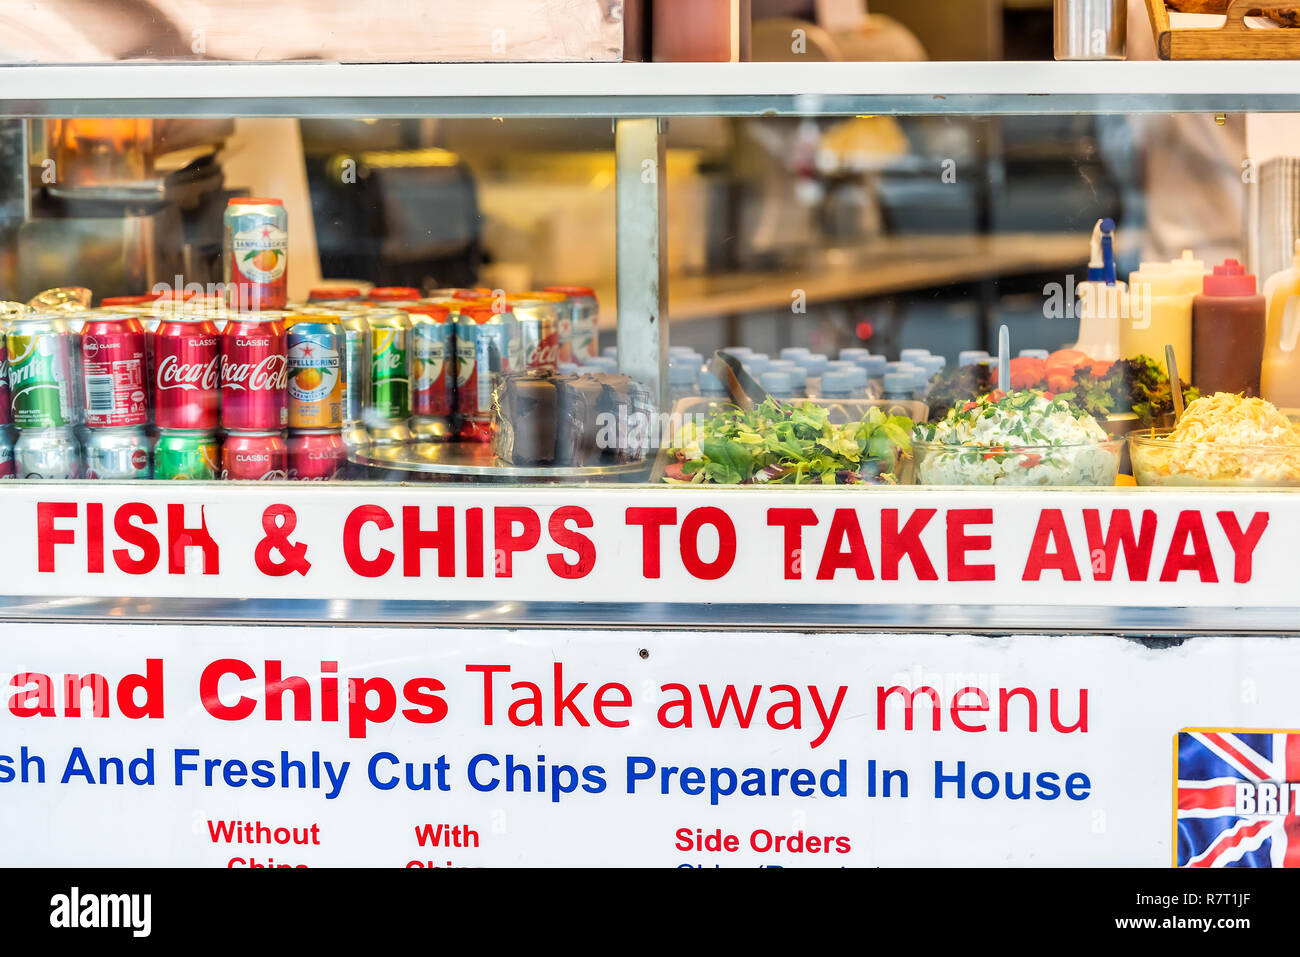 London, UK - September 12, 2018: Greasy street food, fried french fries chips take away menu restaurant sign, soft drinks in SoHo on window display cl Stock Photo